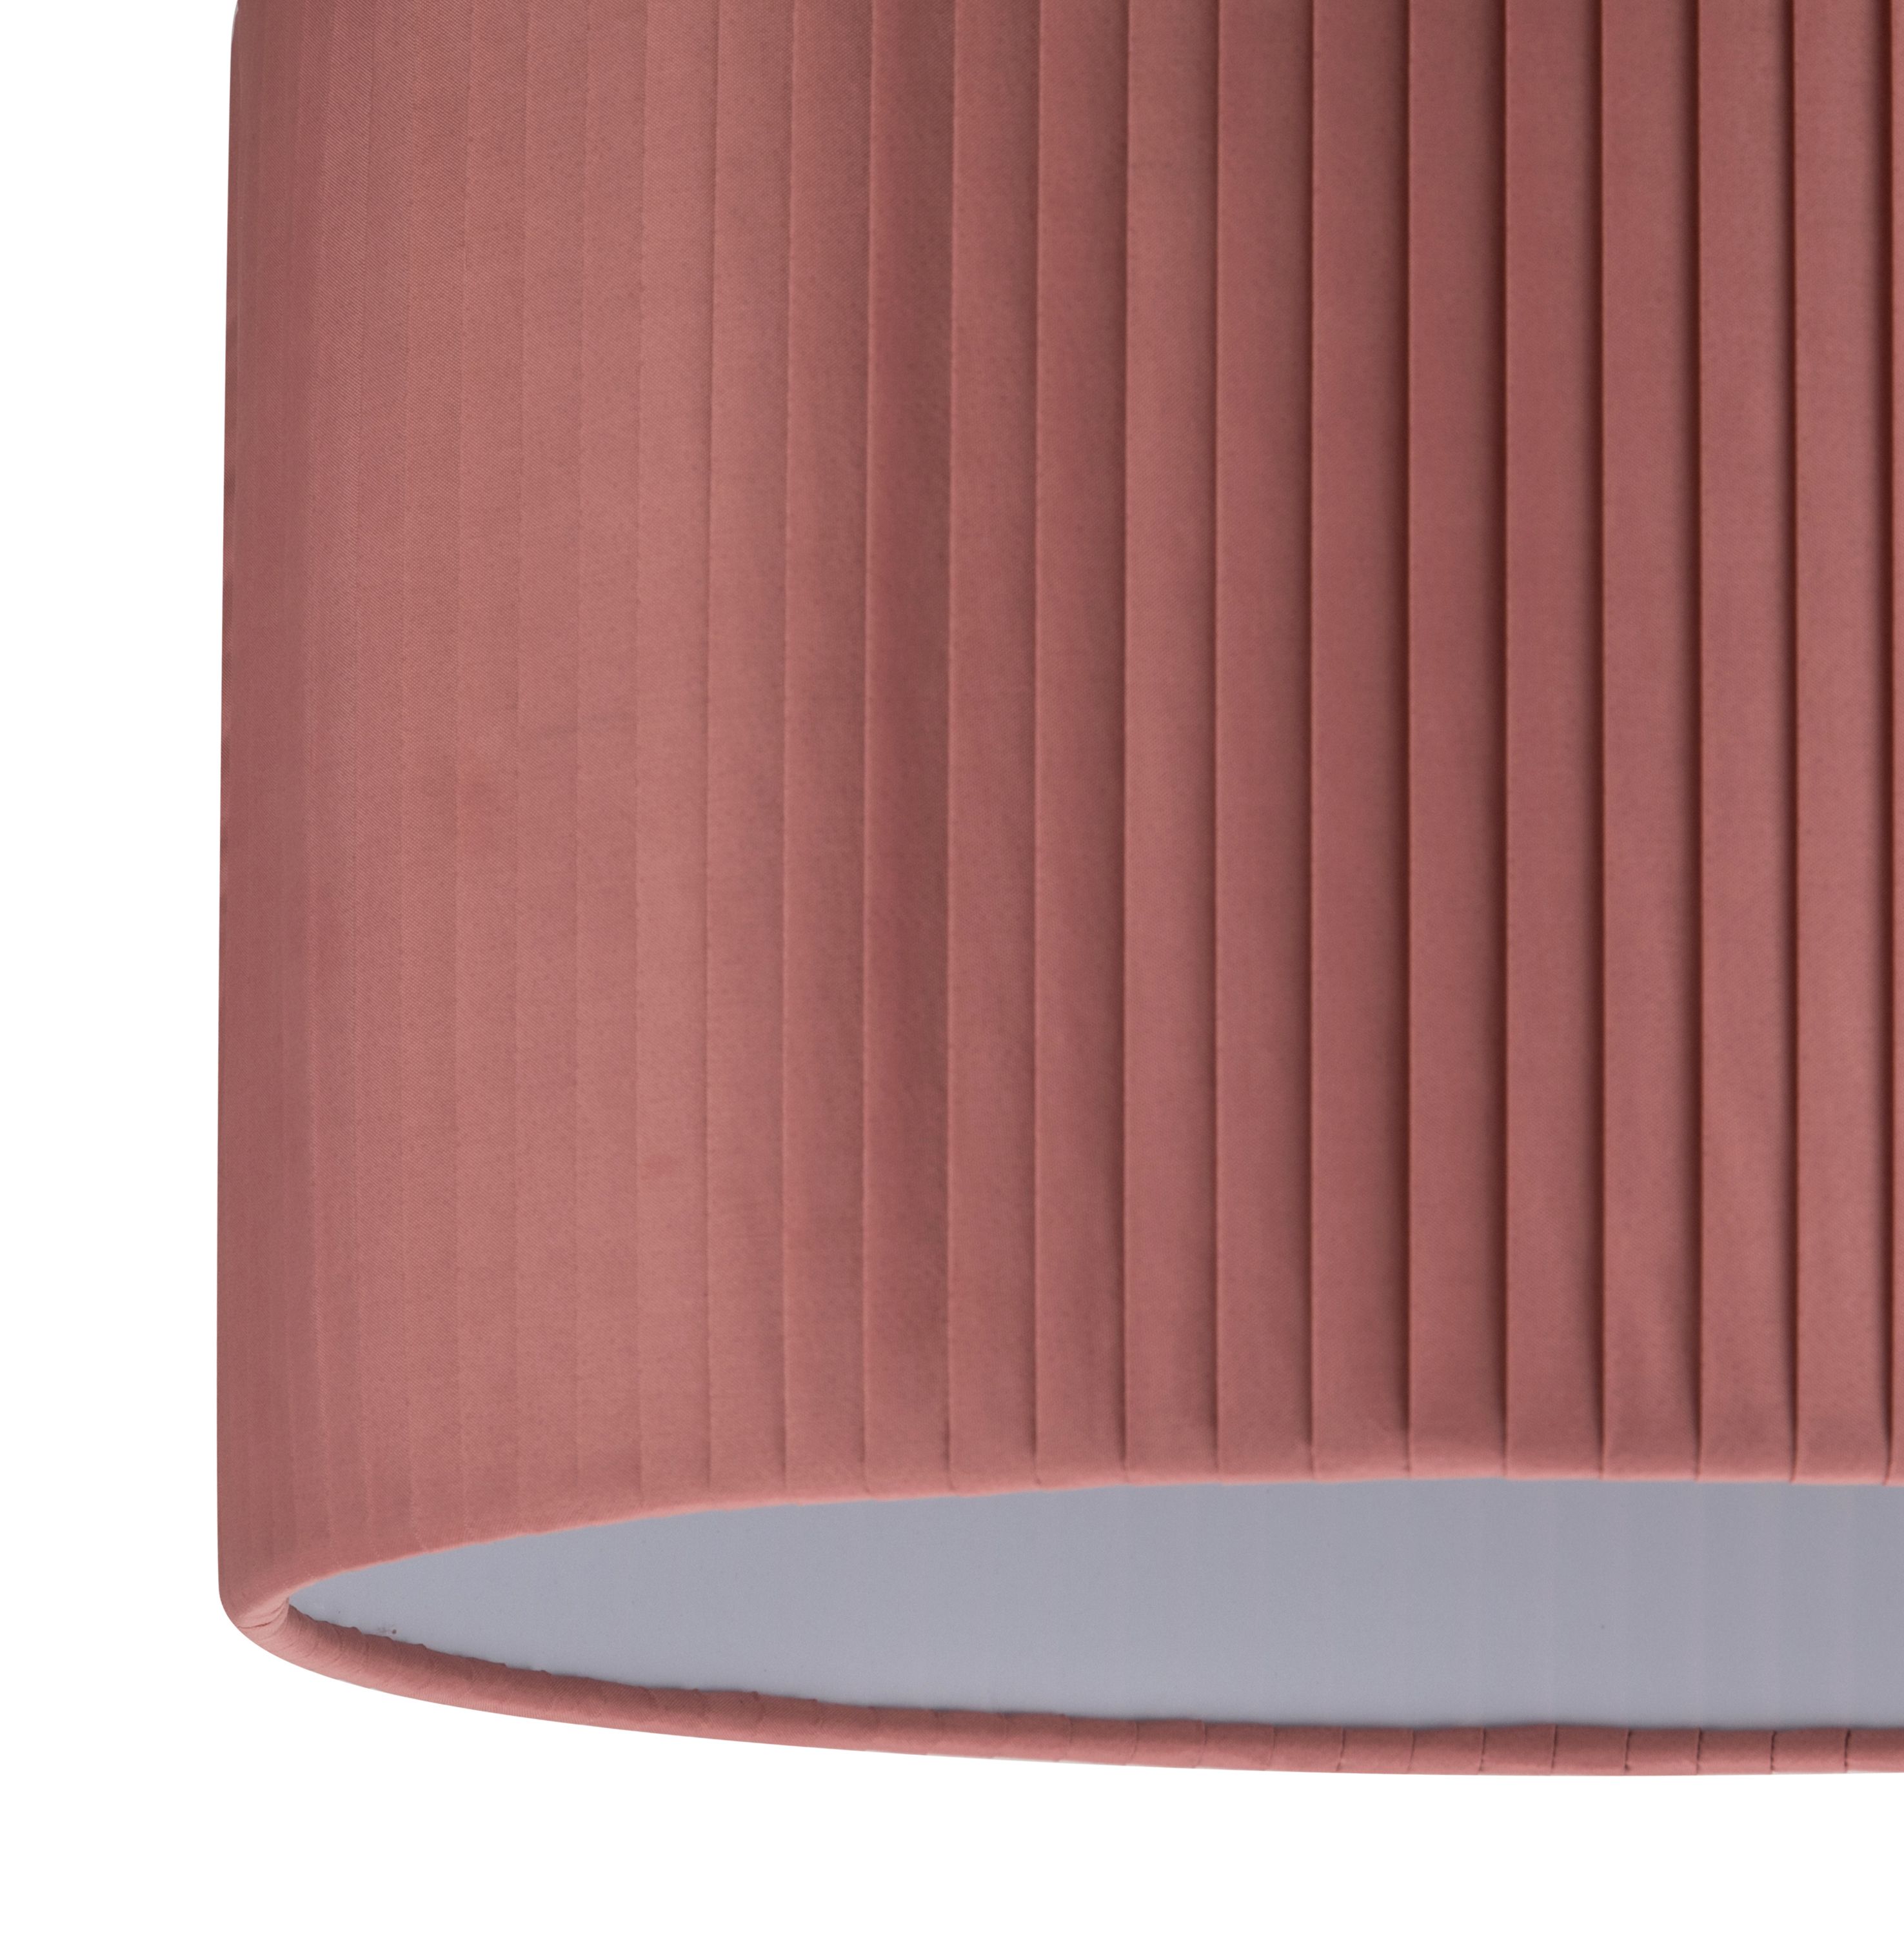 GoodHome Louth Pink Round Lamp shade (D)30cm